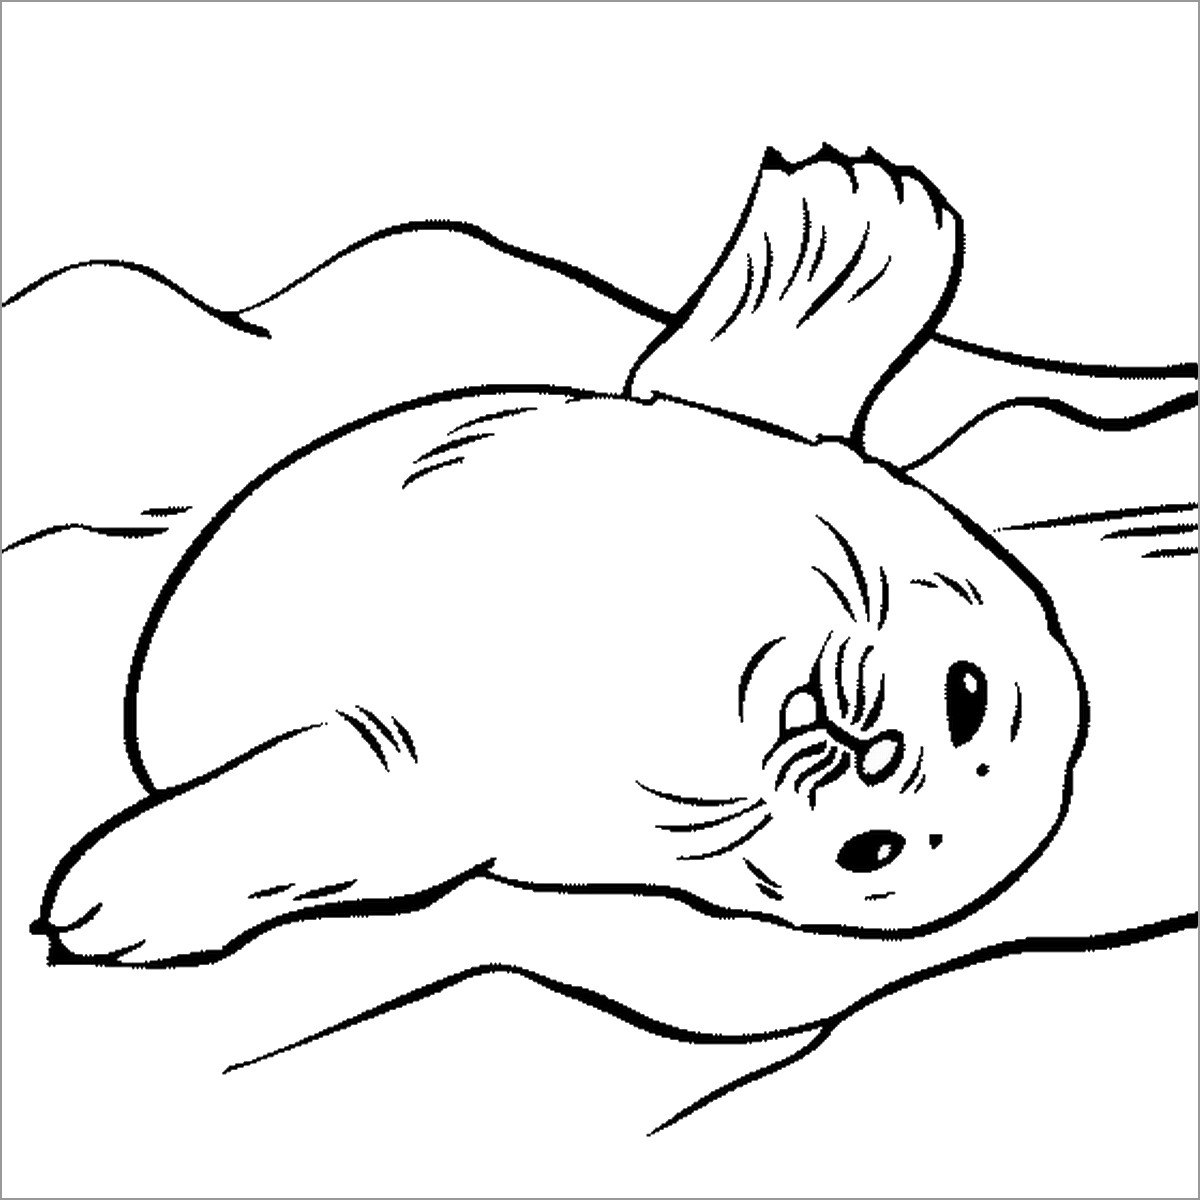 Seal Coloring Page to Print